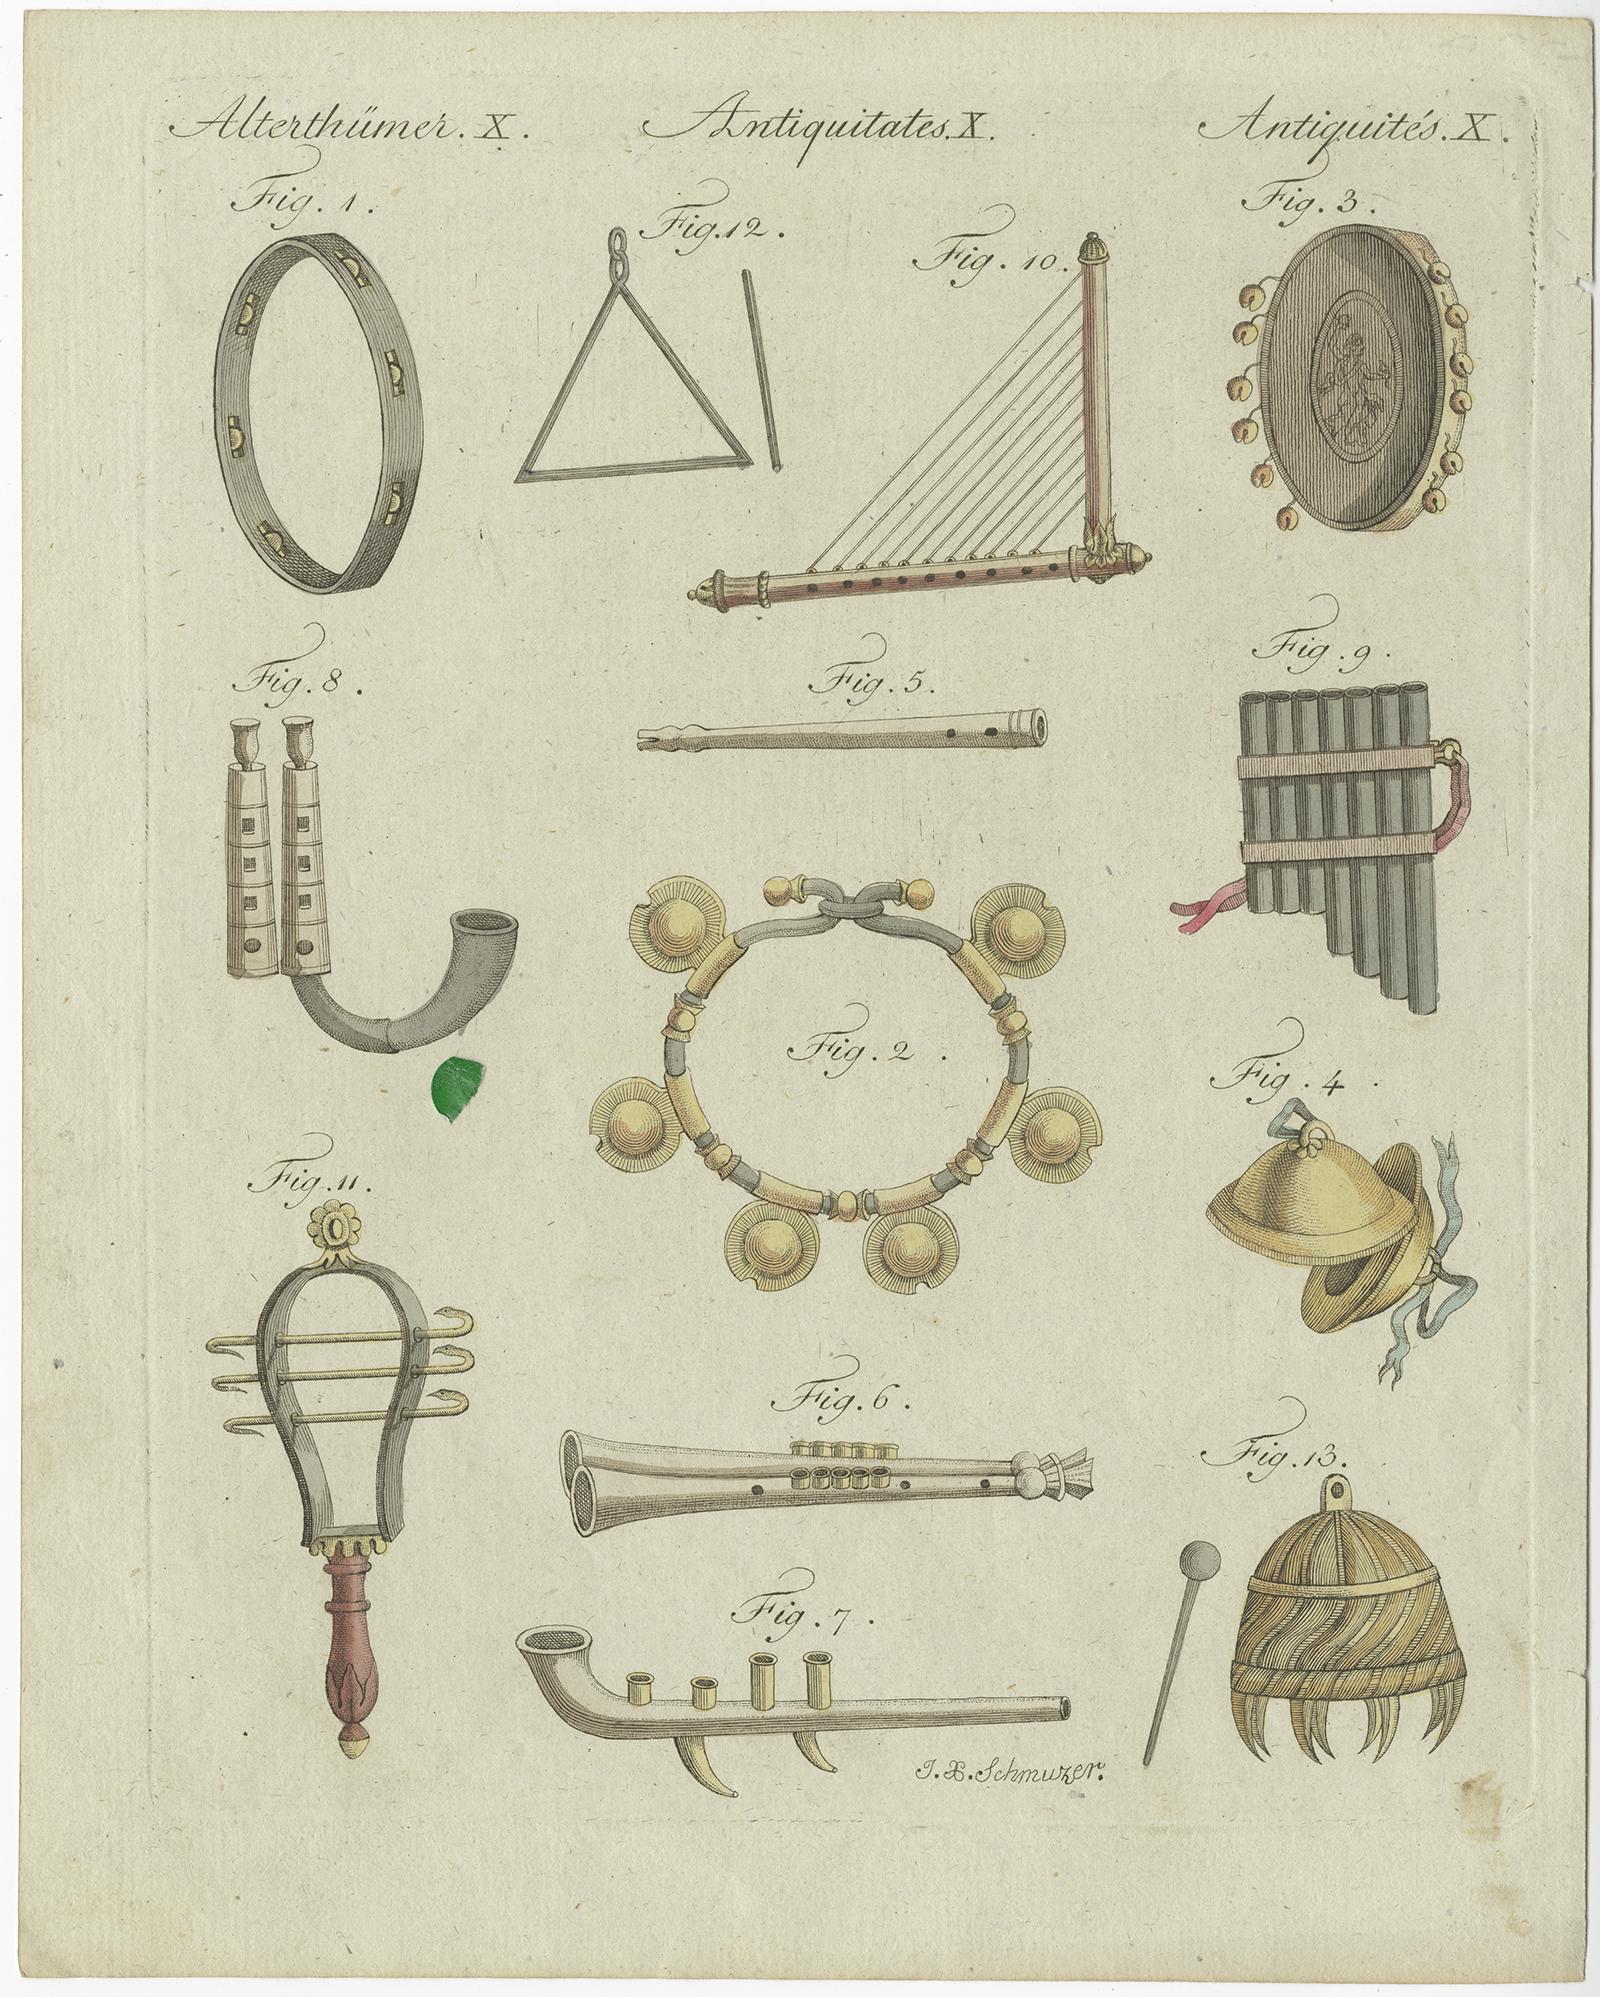 Antique print depicting various music instruments, including flutes, triangle, tambourine and more. . Originates from 'Bilderbuch für Kinder'. Engraved by J.B. Schmuzer. 

Artists and Engravers: Friedrich Johann Justin Bertuch (1747-1822 German)